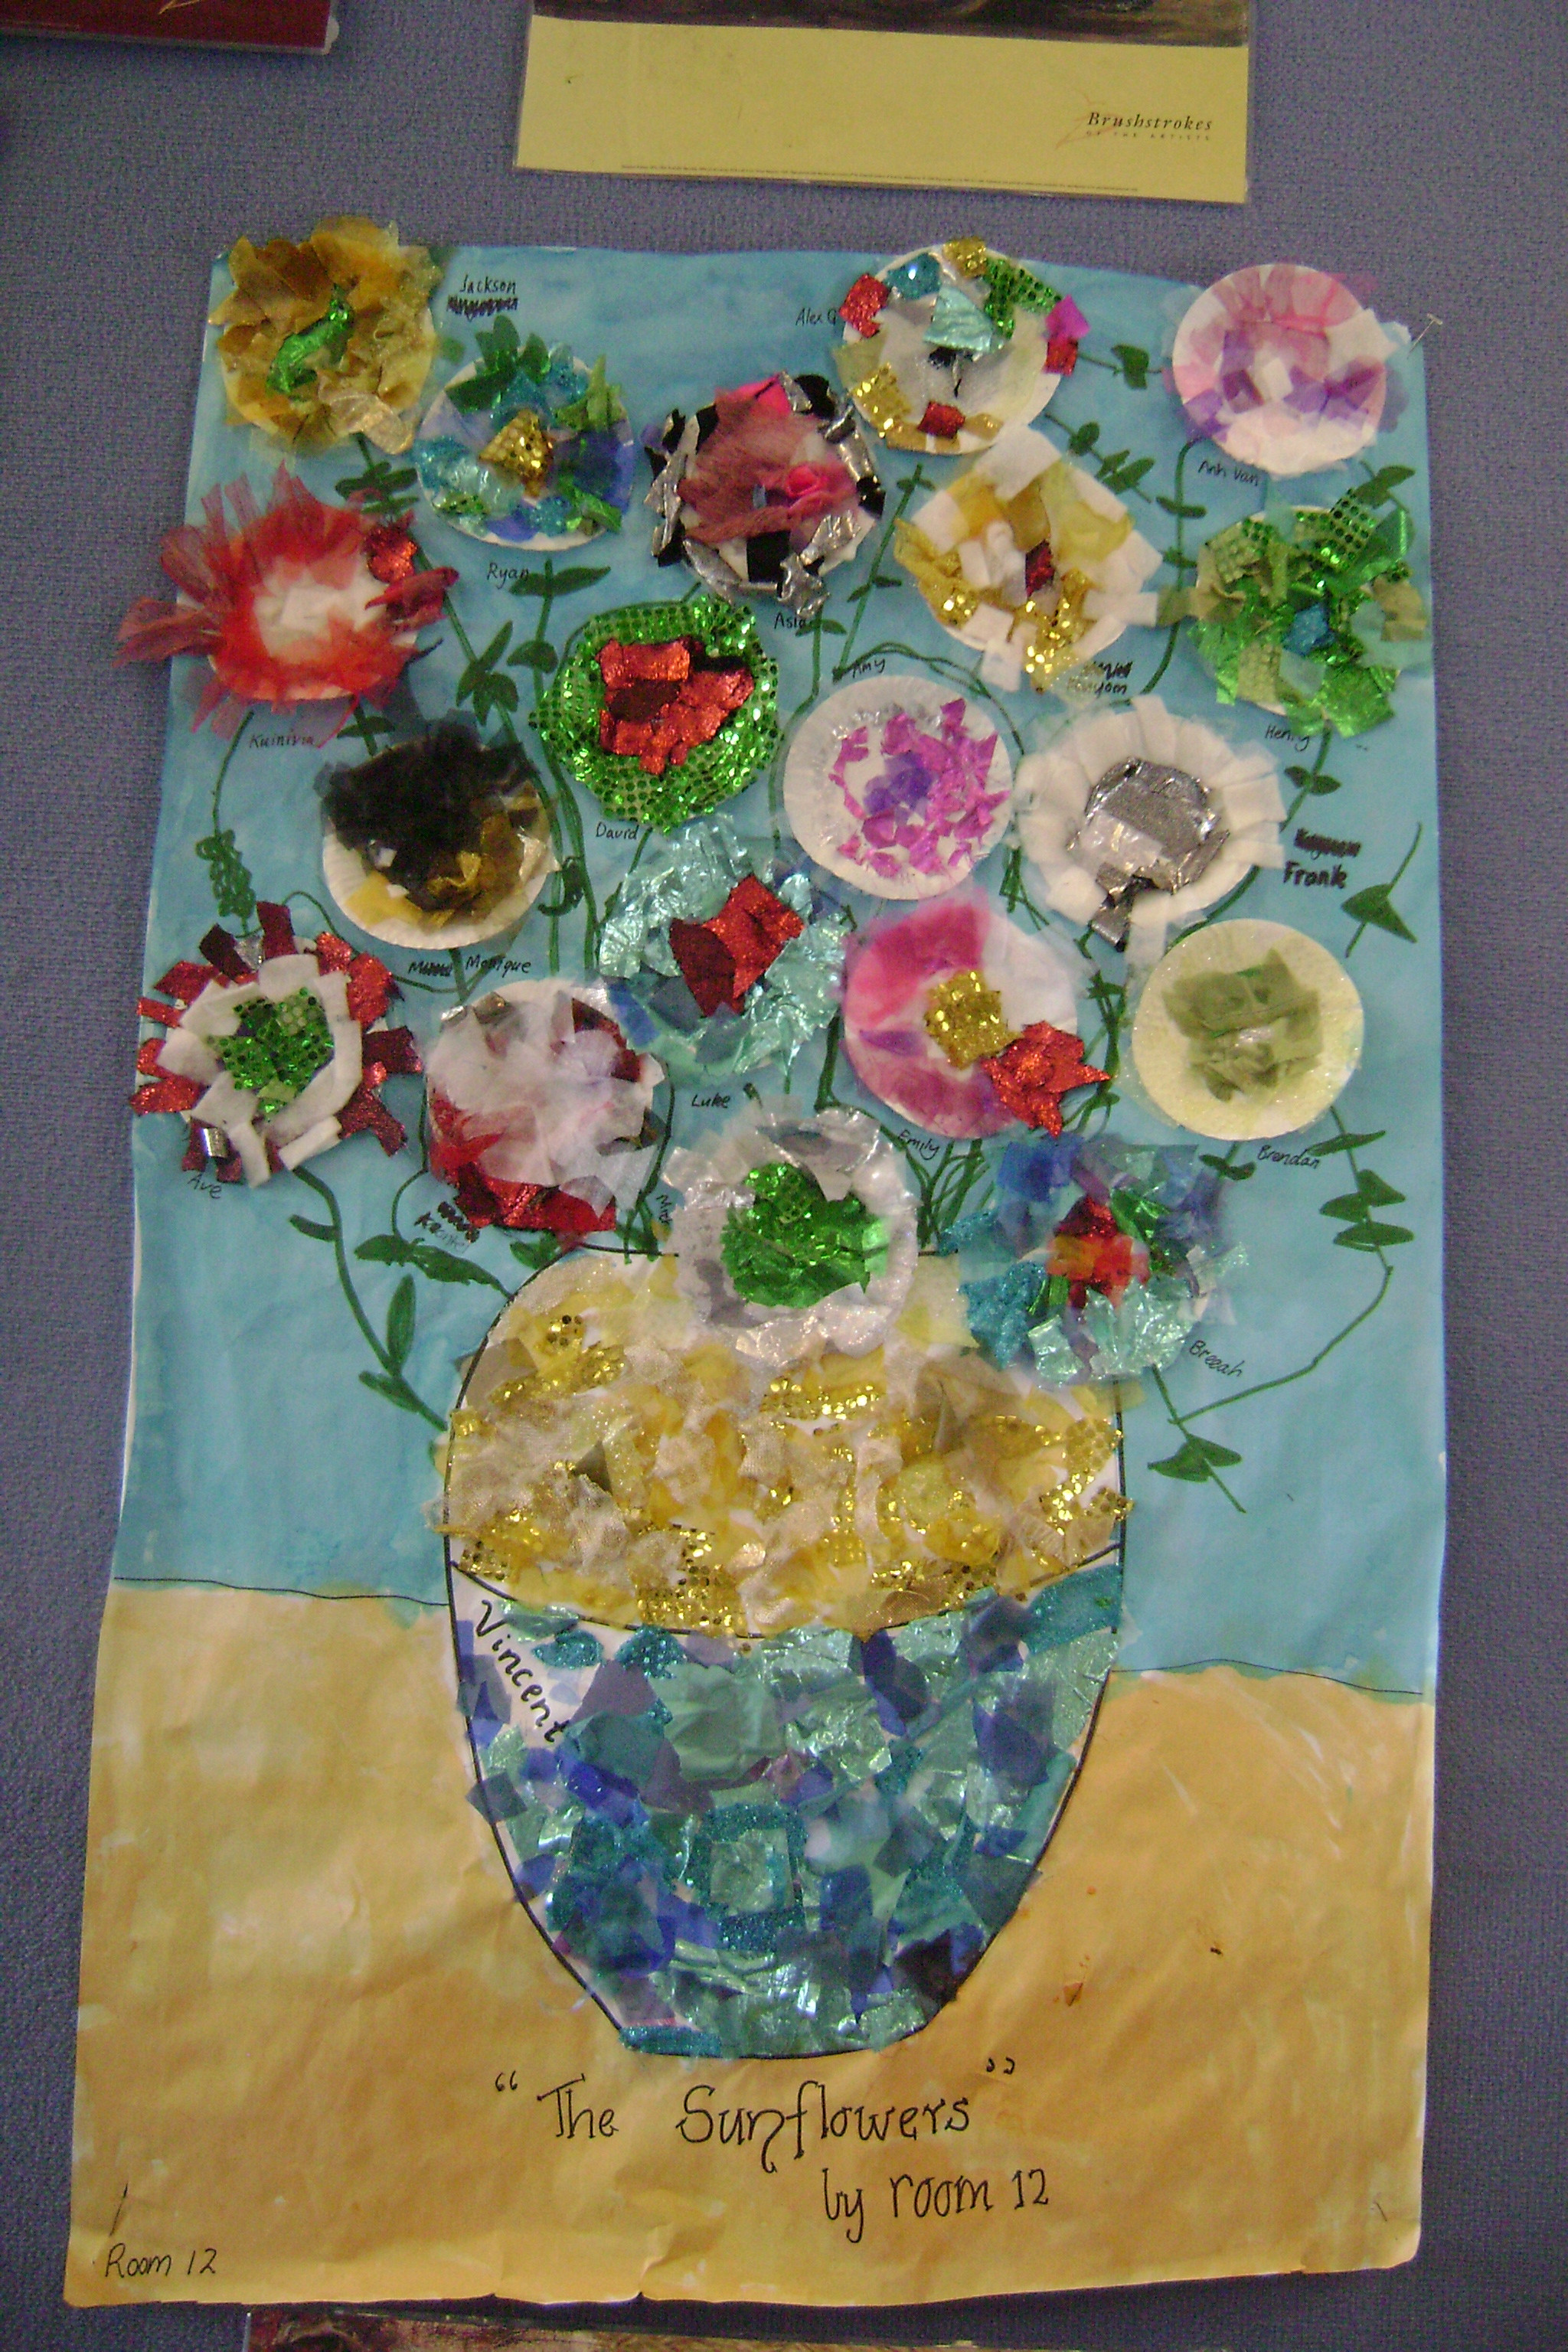 22 Stunning Van Gogh Vase Of Sunflowers 2022 free download van gogh vase of sunflowers of prep st albans east ps visual arts in the